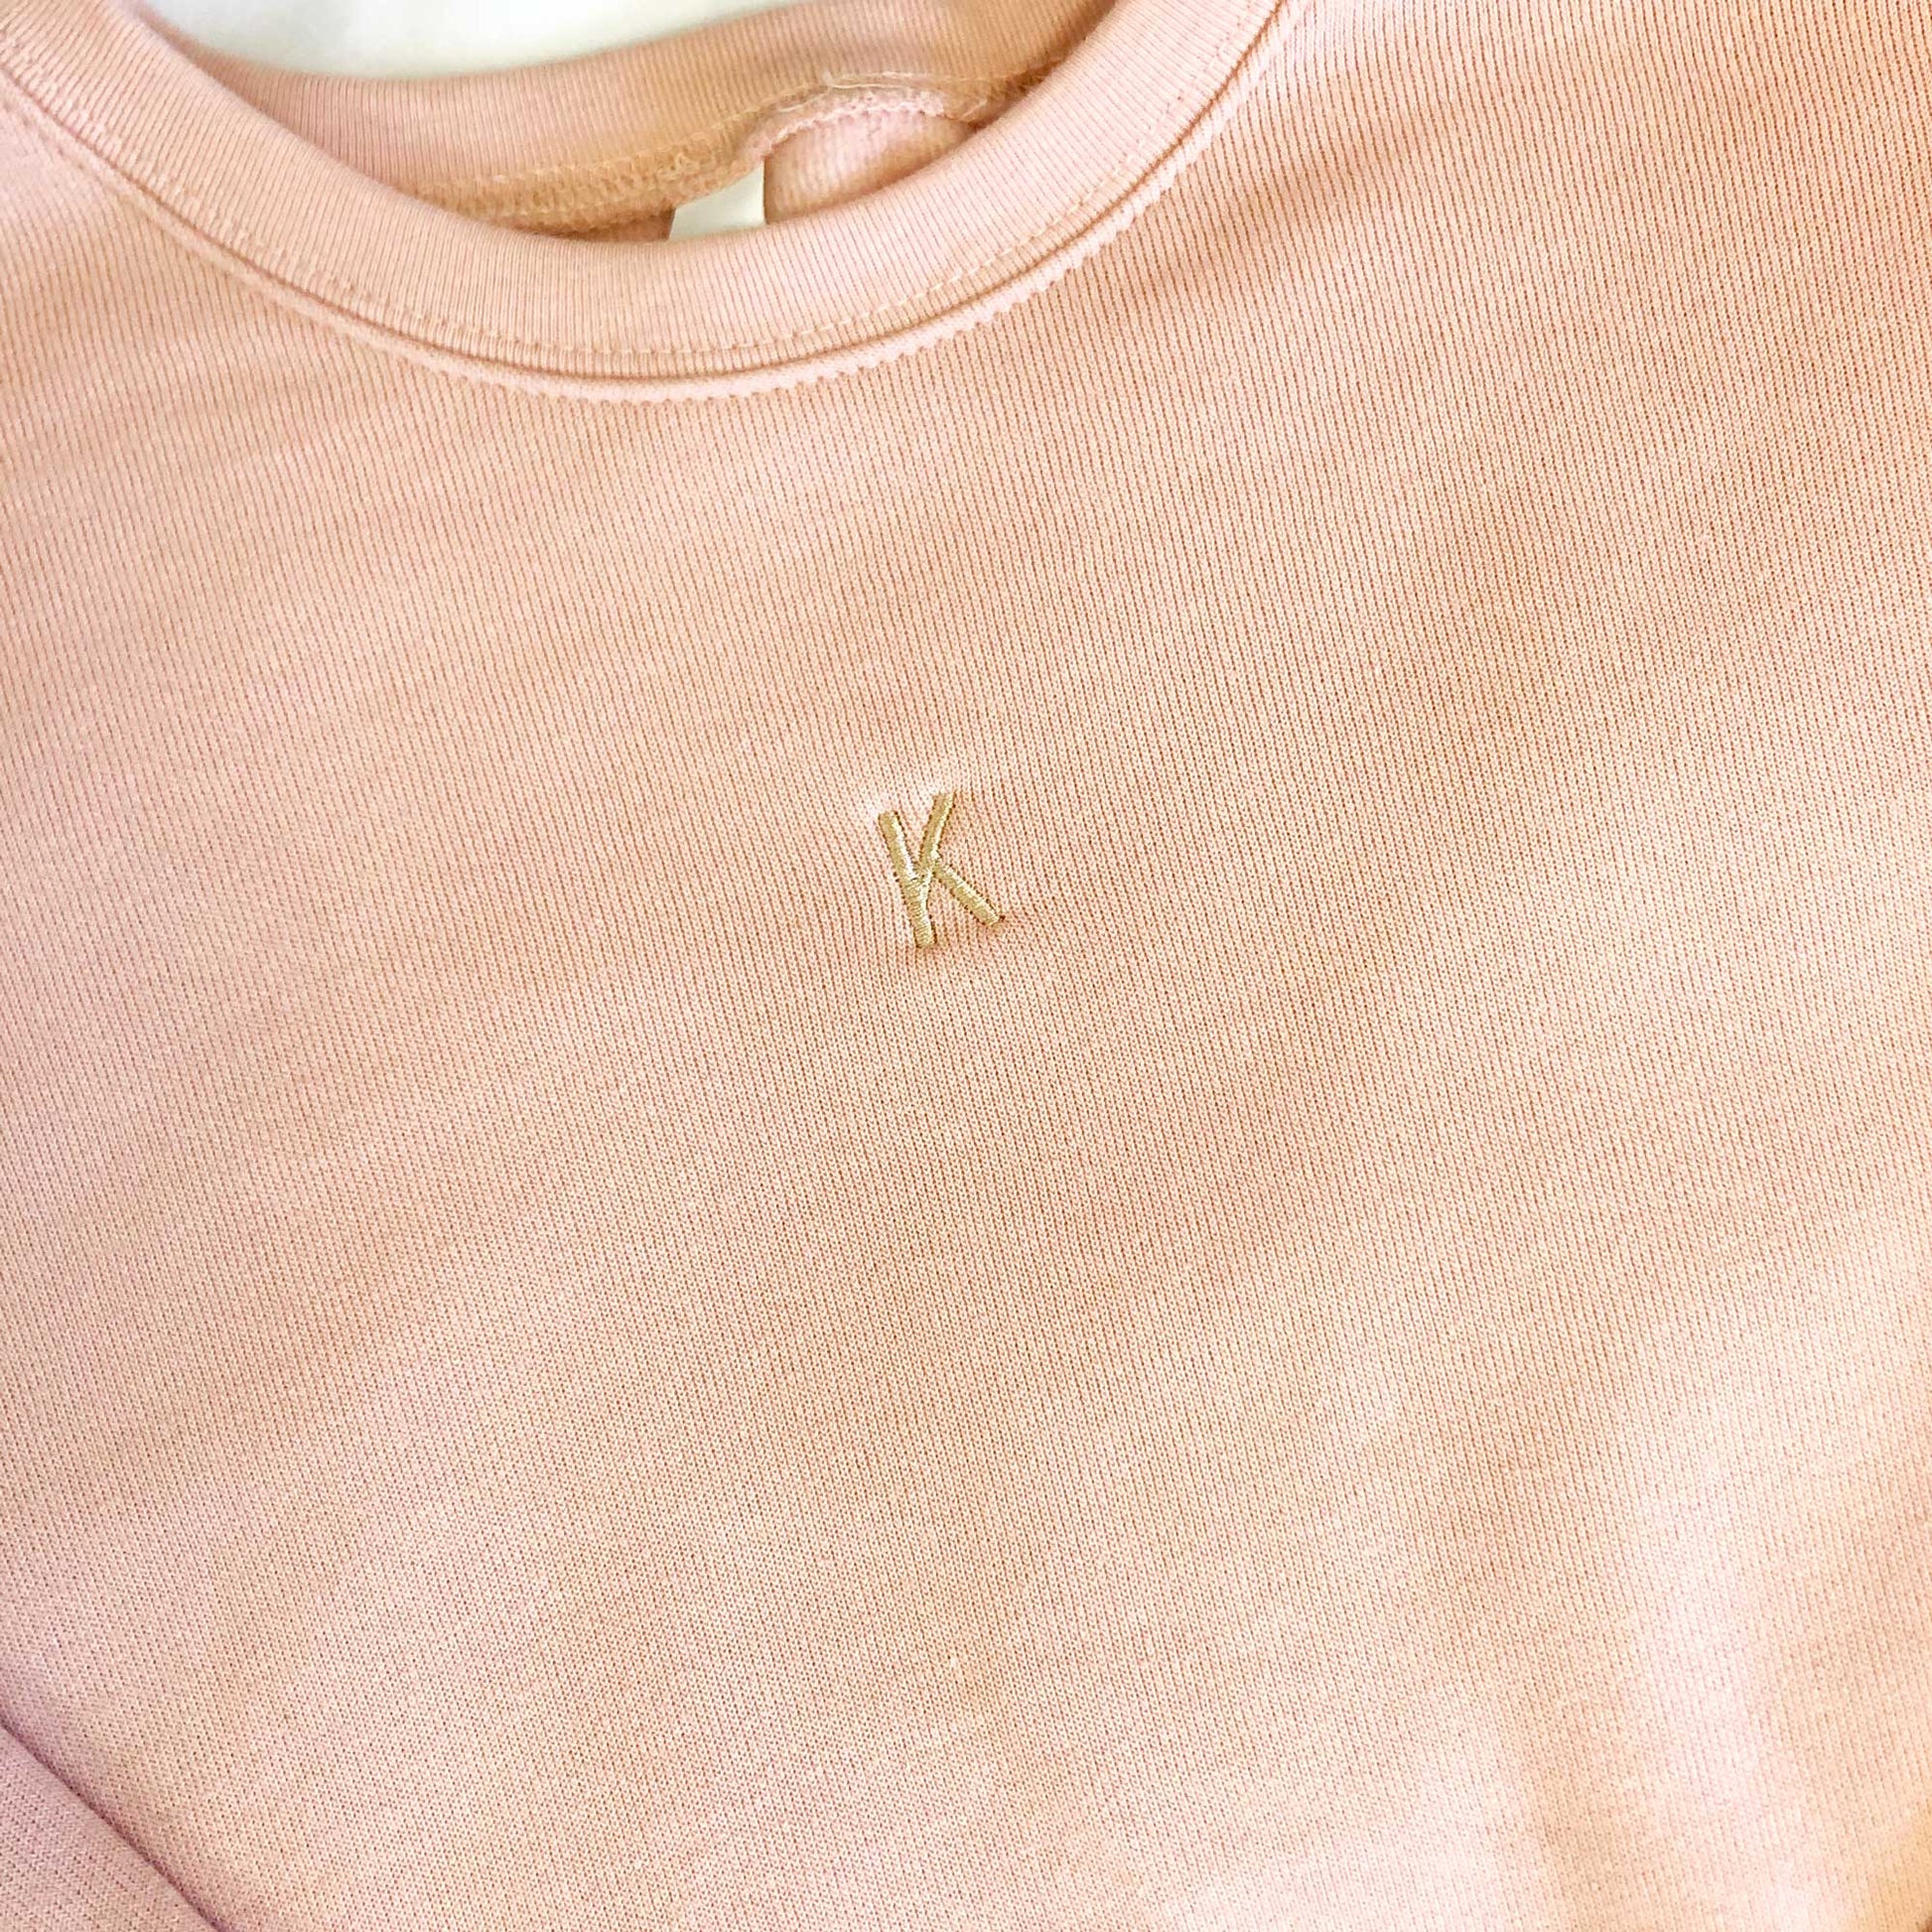 close up of mini one letter personalized embroidery on a peach crewneck bella and canvas sweatshirt